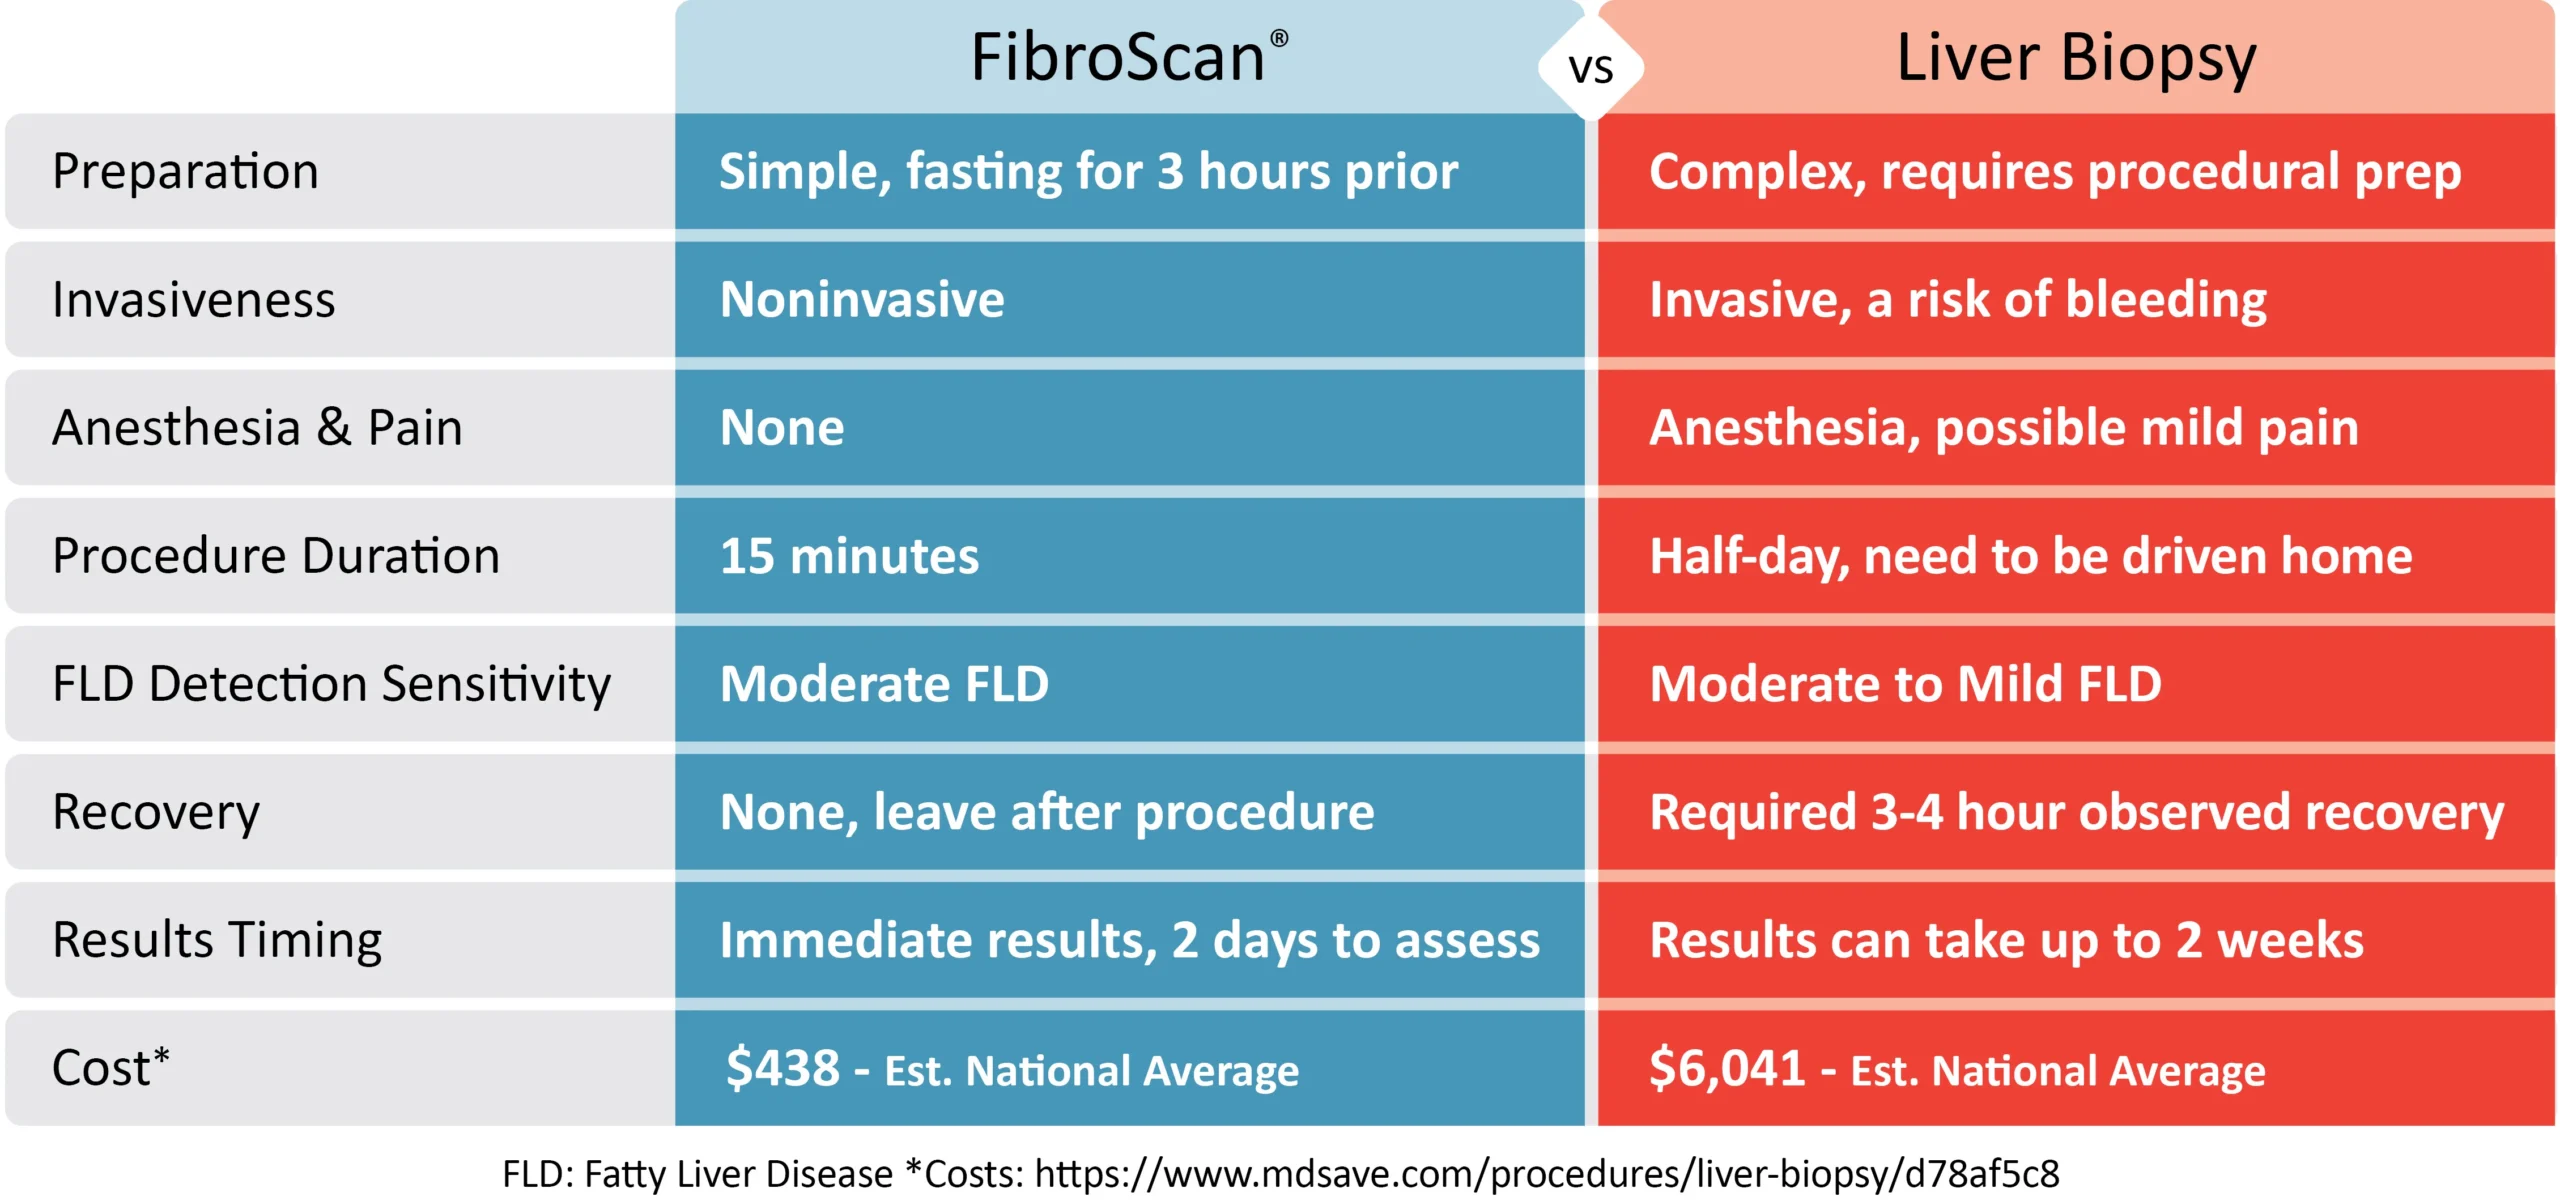 Introducing FibroScan - The Noninvasive Ultrasound Test For Liver Disease 